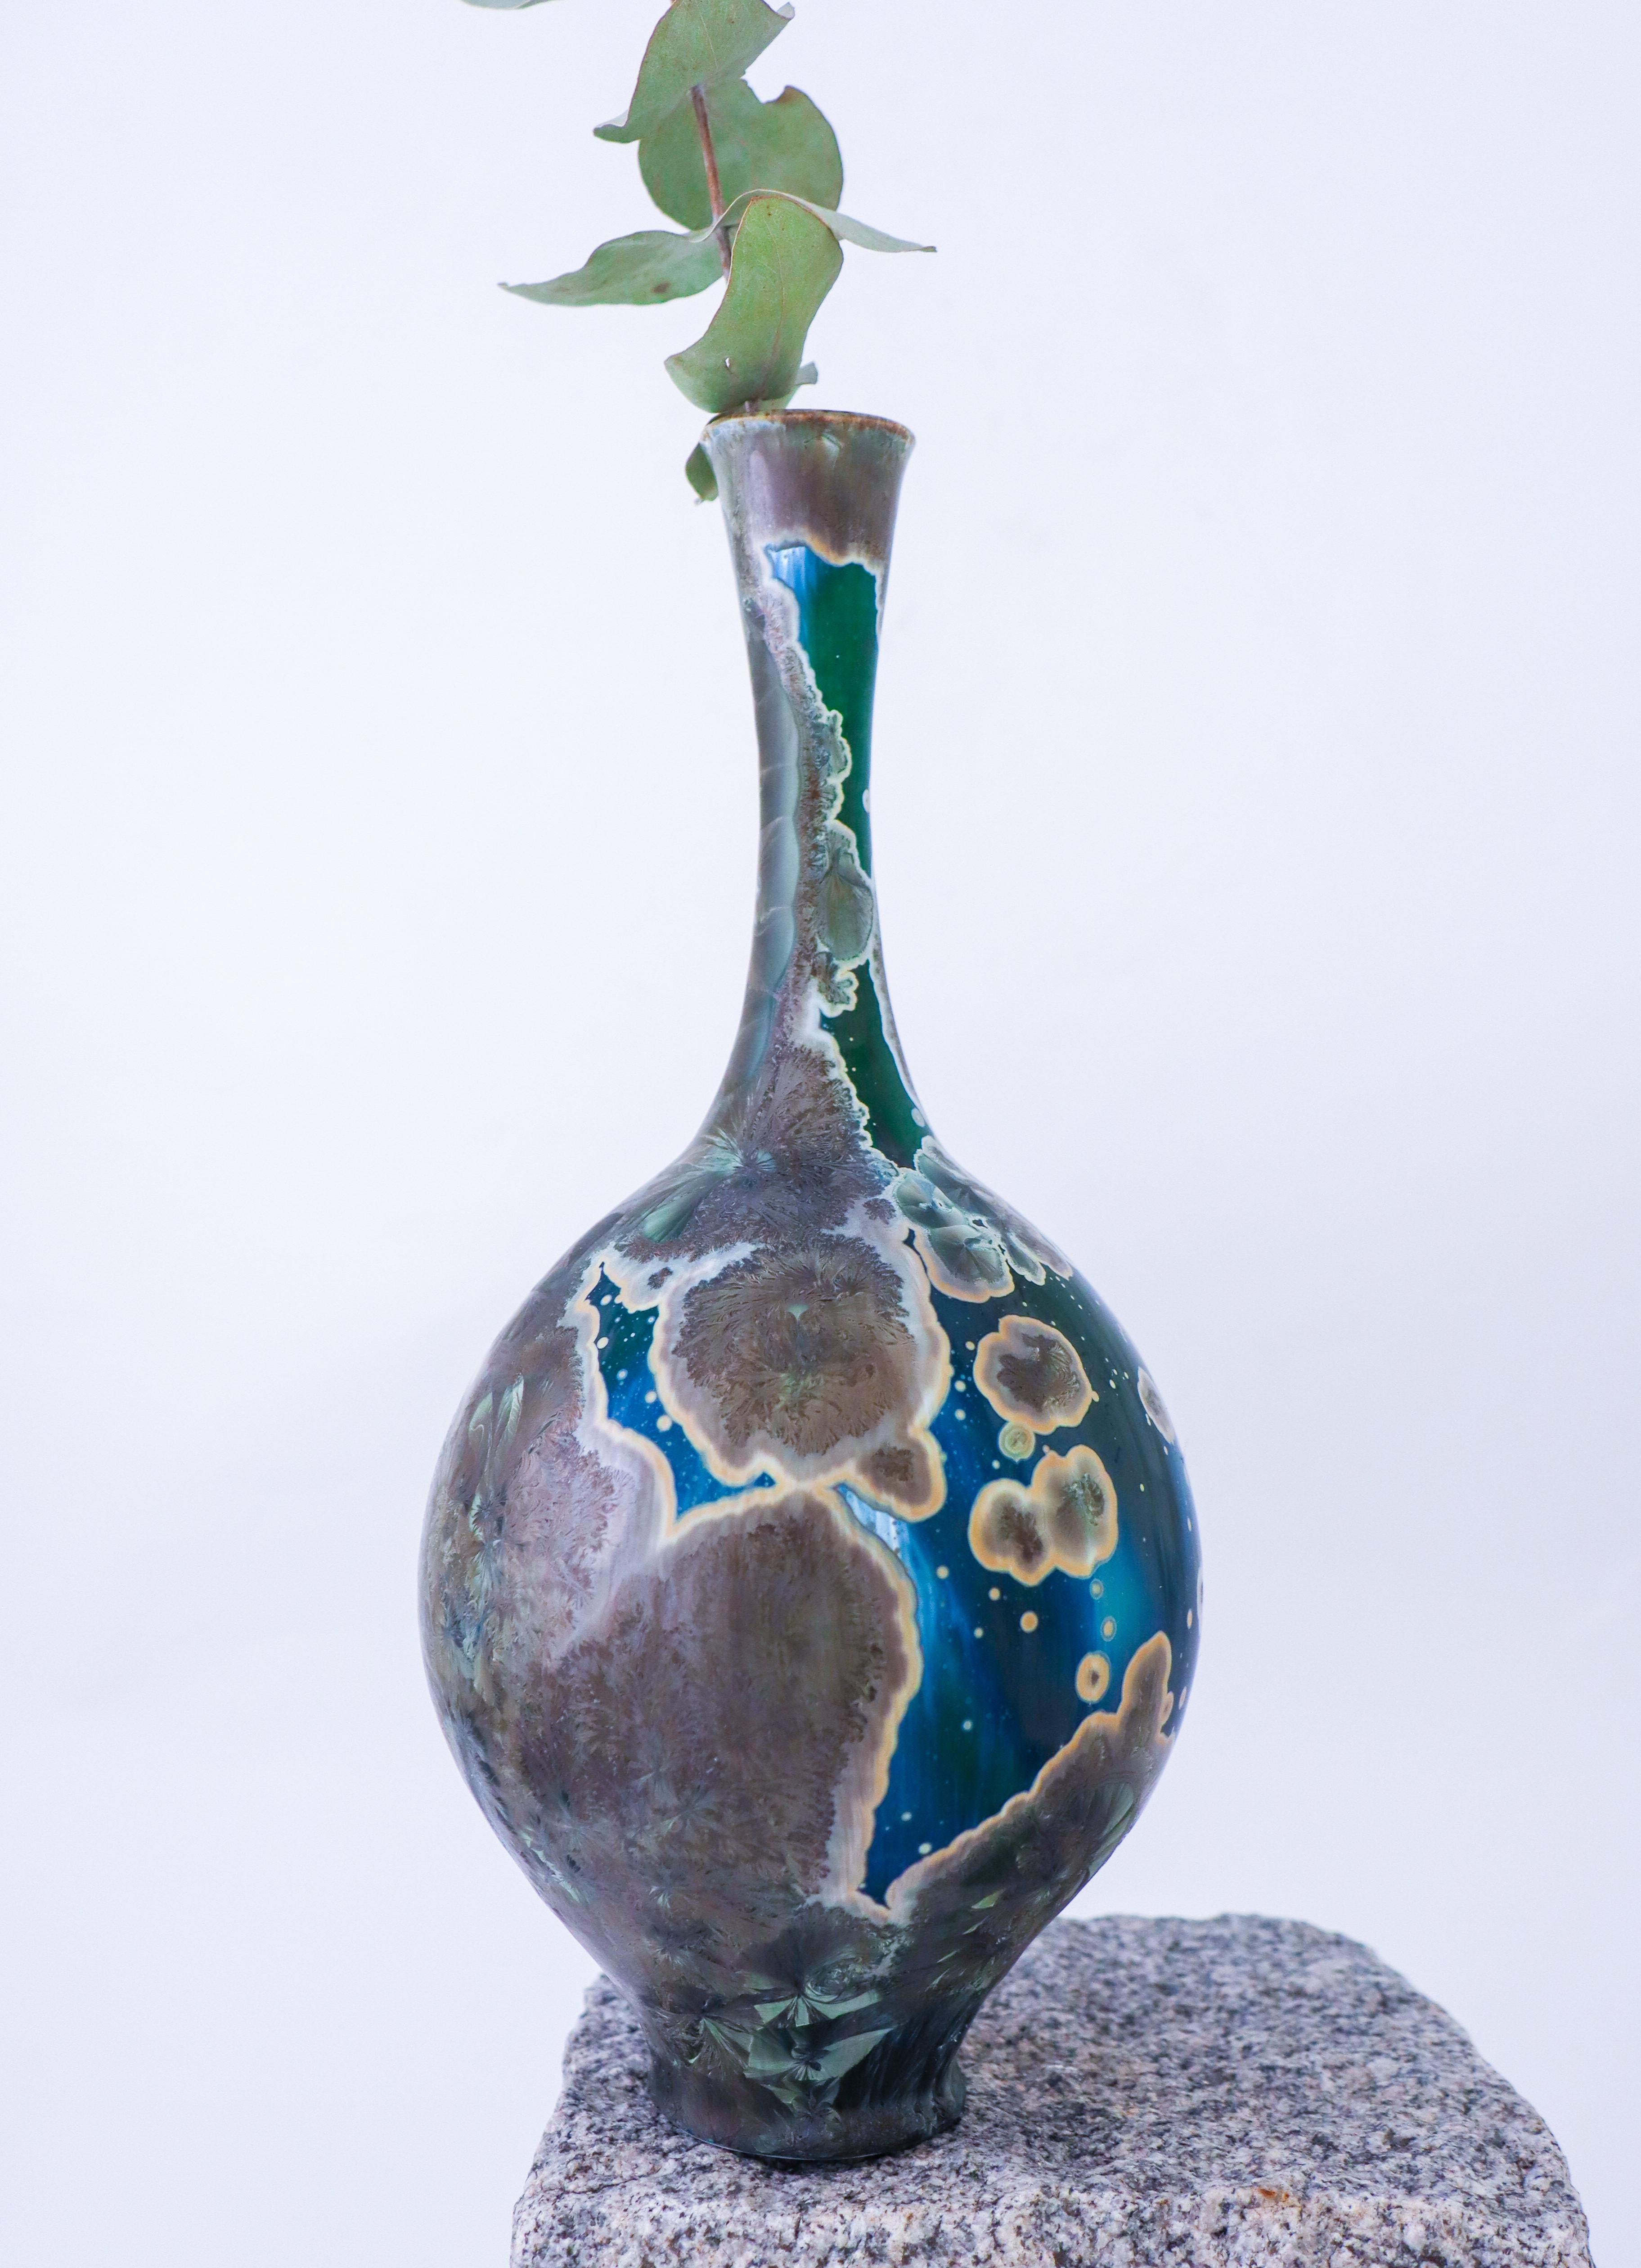 A blue & green vase with a stunning crystalline glaze designed by Isak Isaksson in Sweden. The vase is 30 cm (12